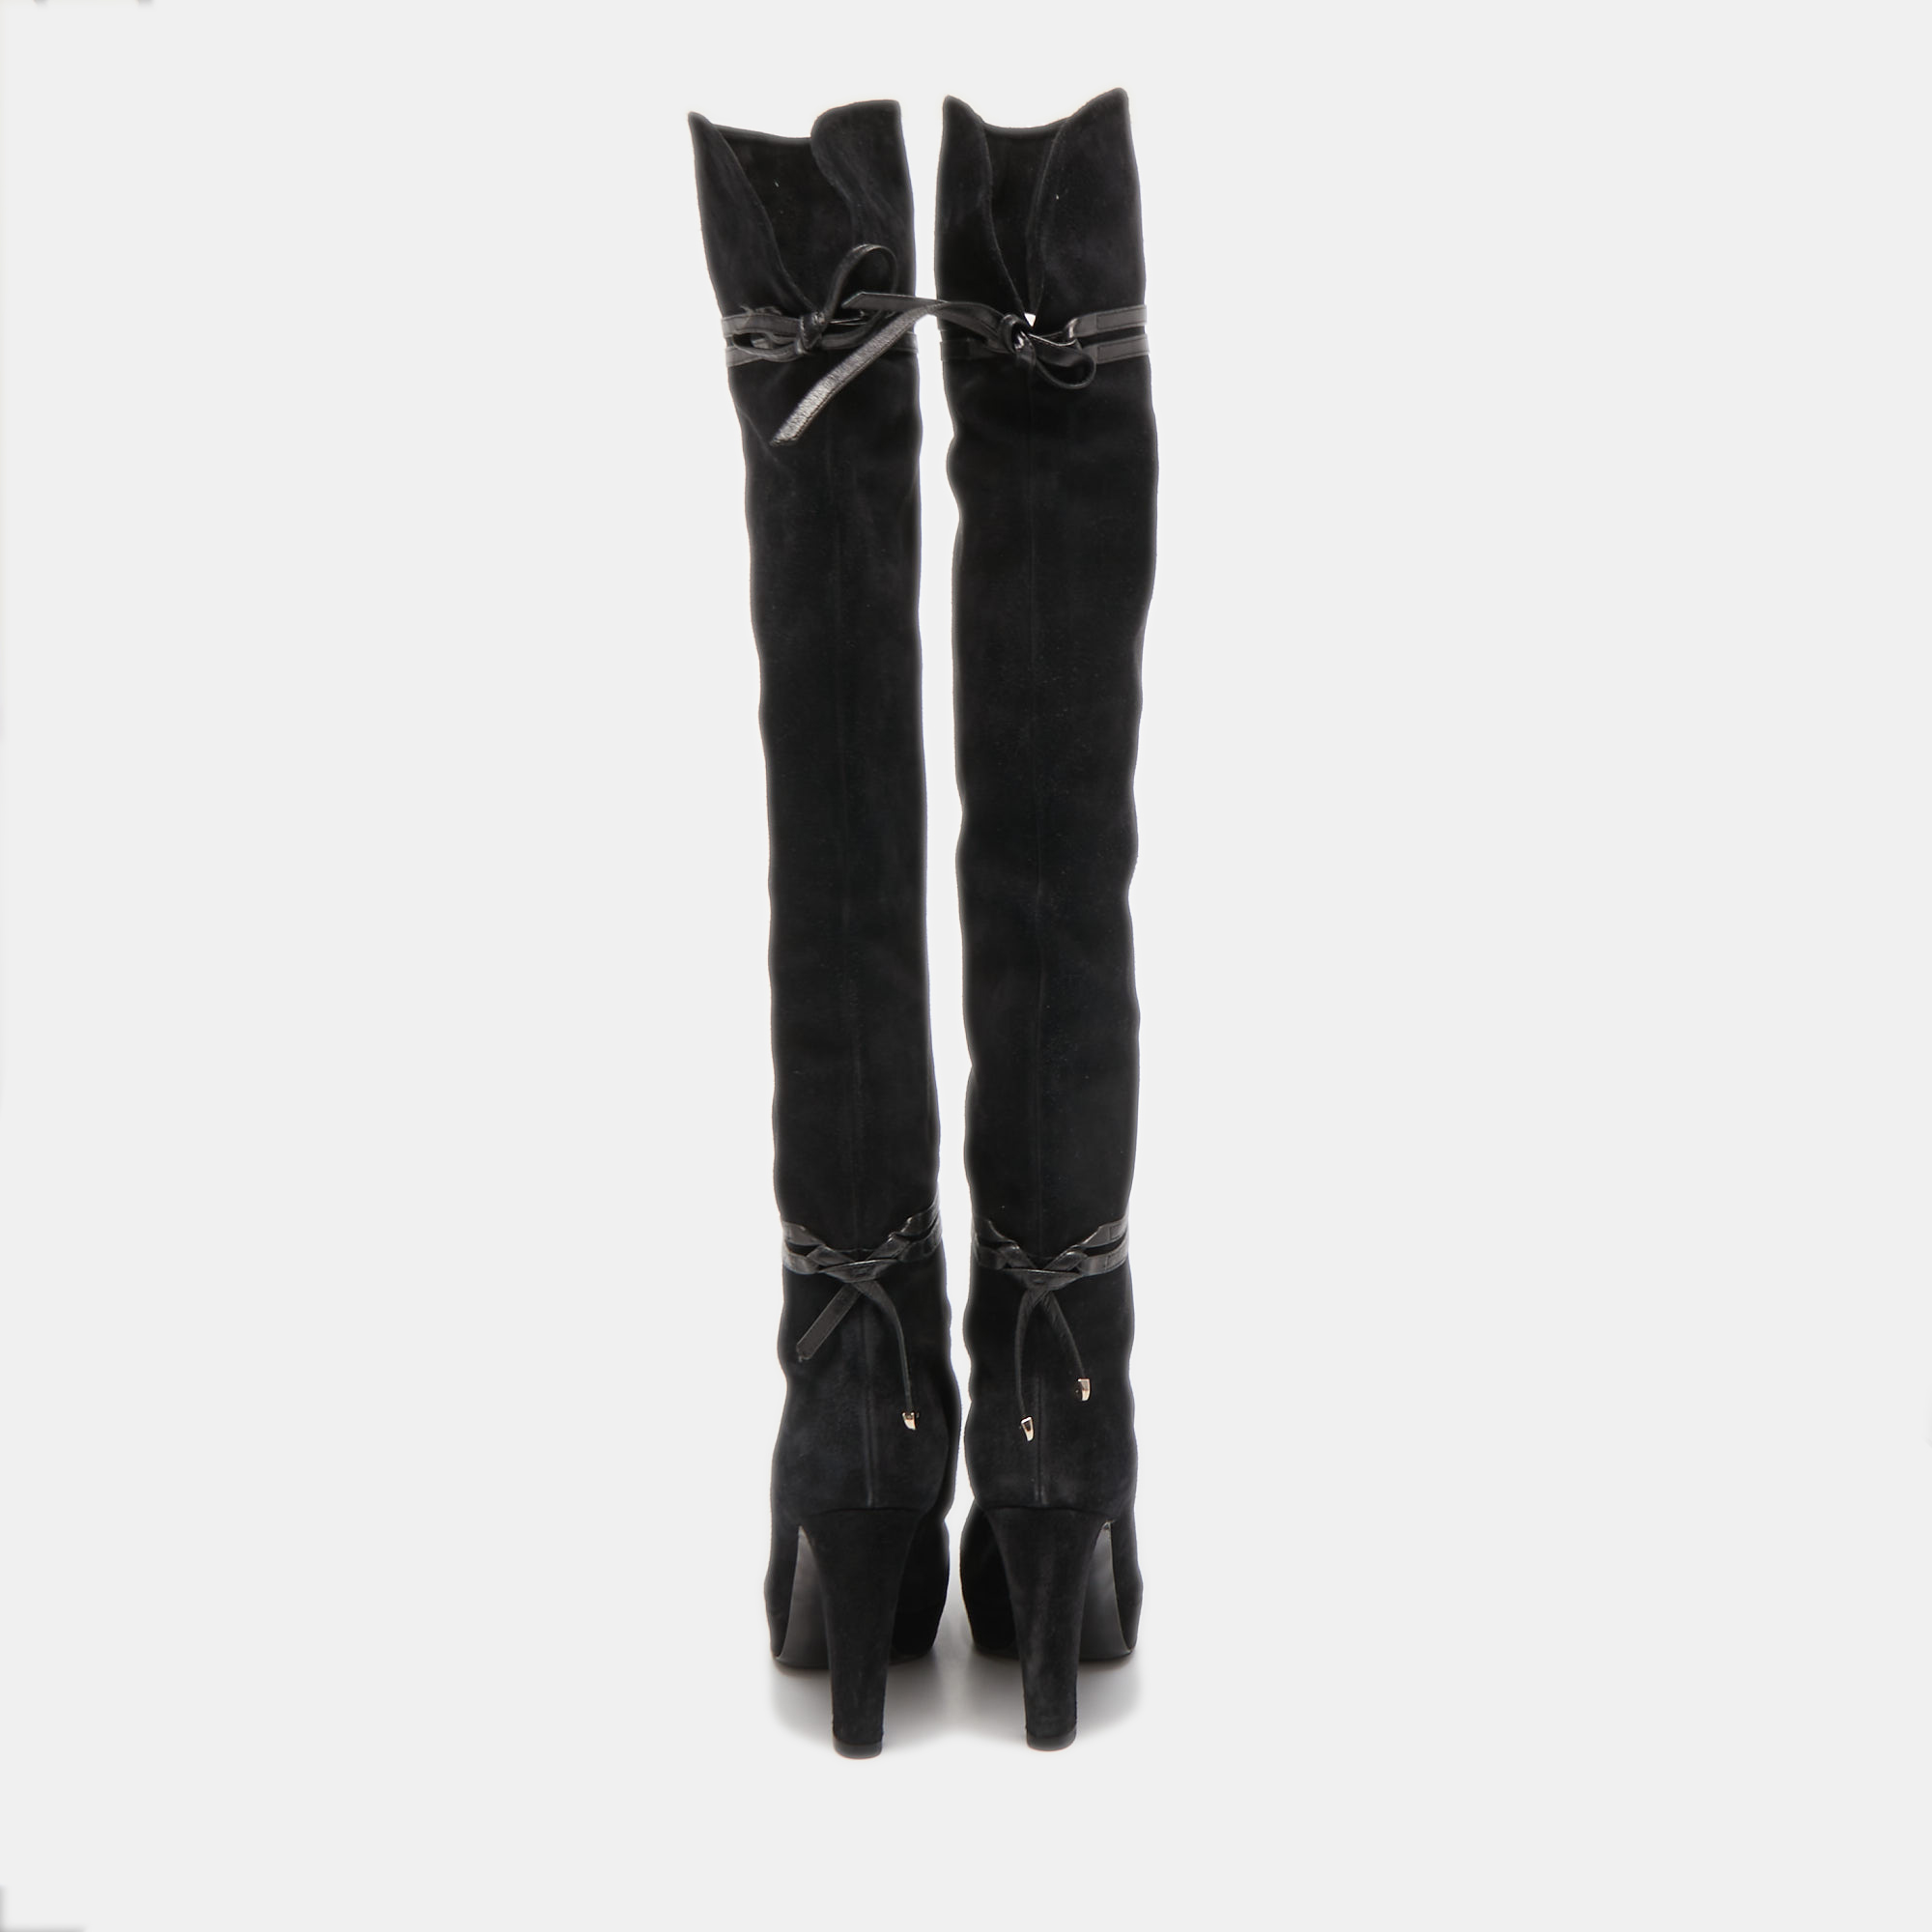 Gucci Black Suede And Leather Bow Over The Knee Boots Size 36.5